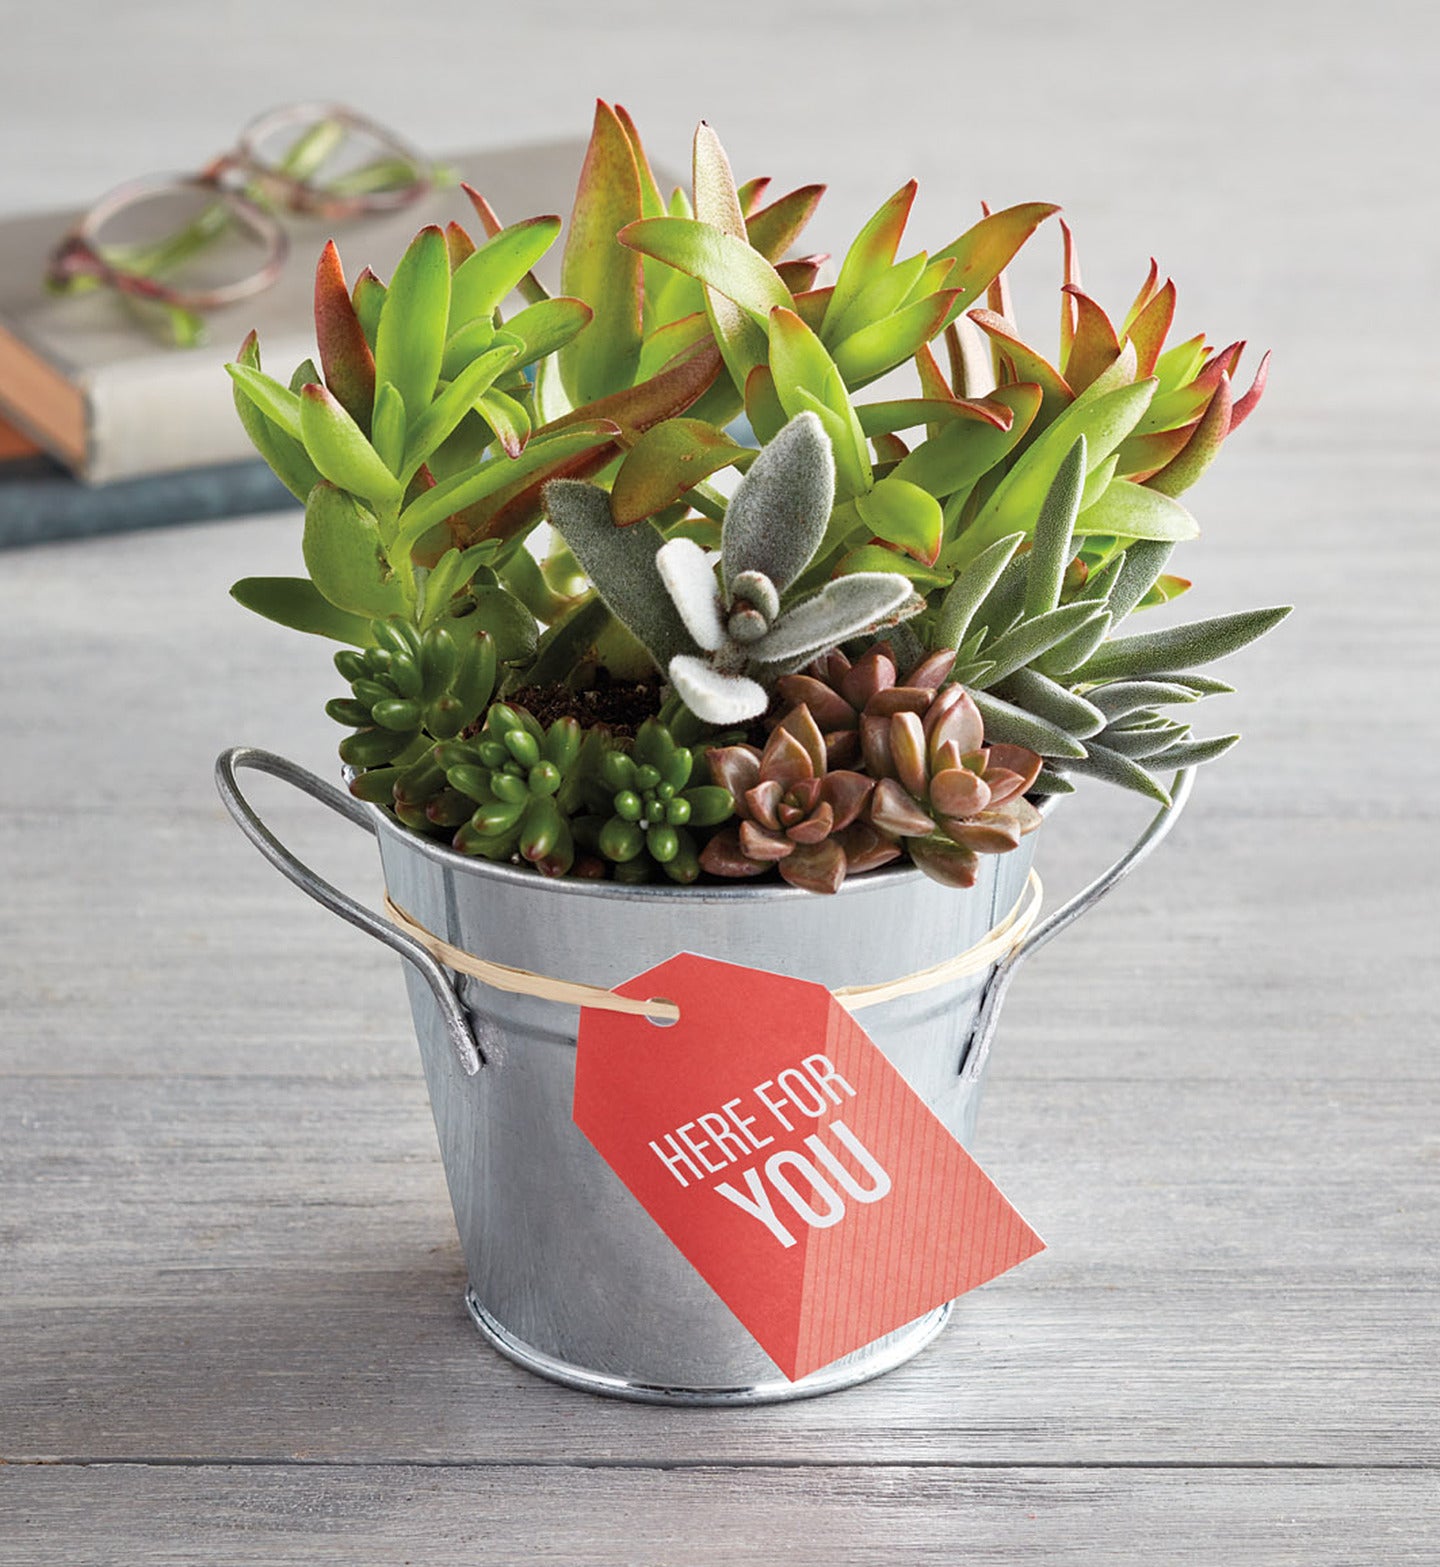 26 Gardening Gift Ideas For Every Budget And Occasion - Sow ʼn Sow